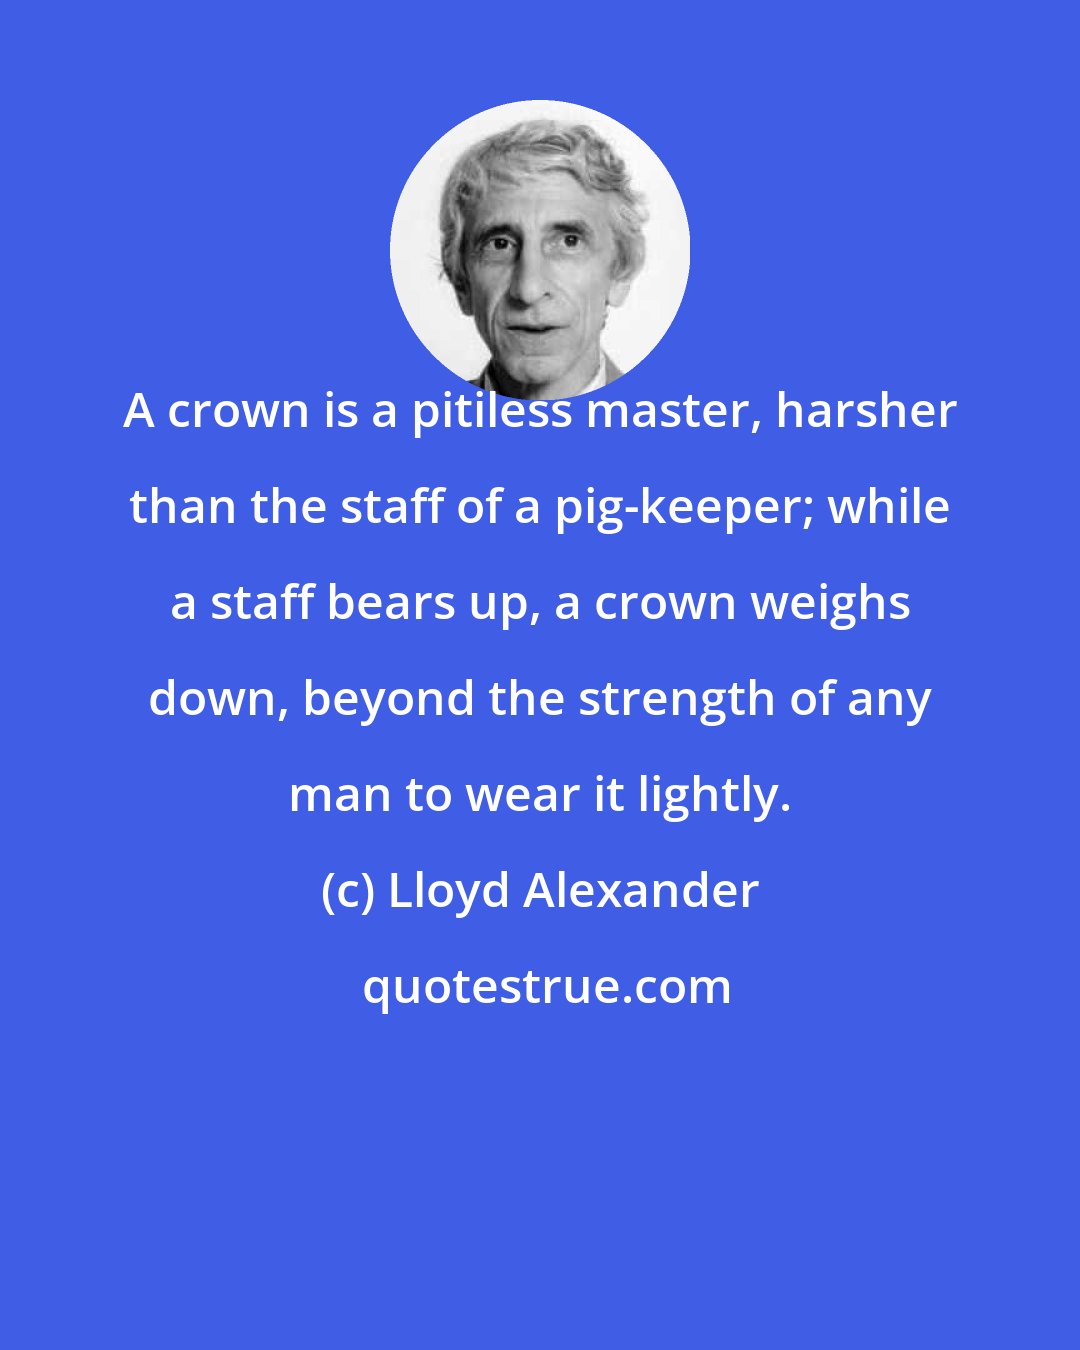 Lloyd Alexander: A crown is a pitiless master, harsher than the staff of a pig-keeper; while a staff bears up, a crown weighs down, beyond the strength of any man to wear it lightly.